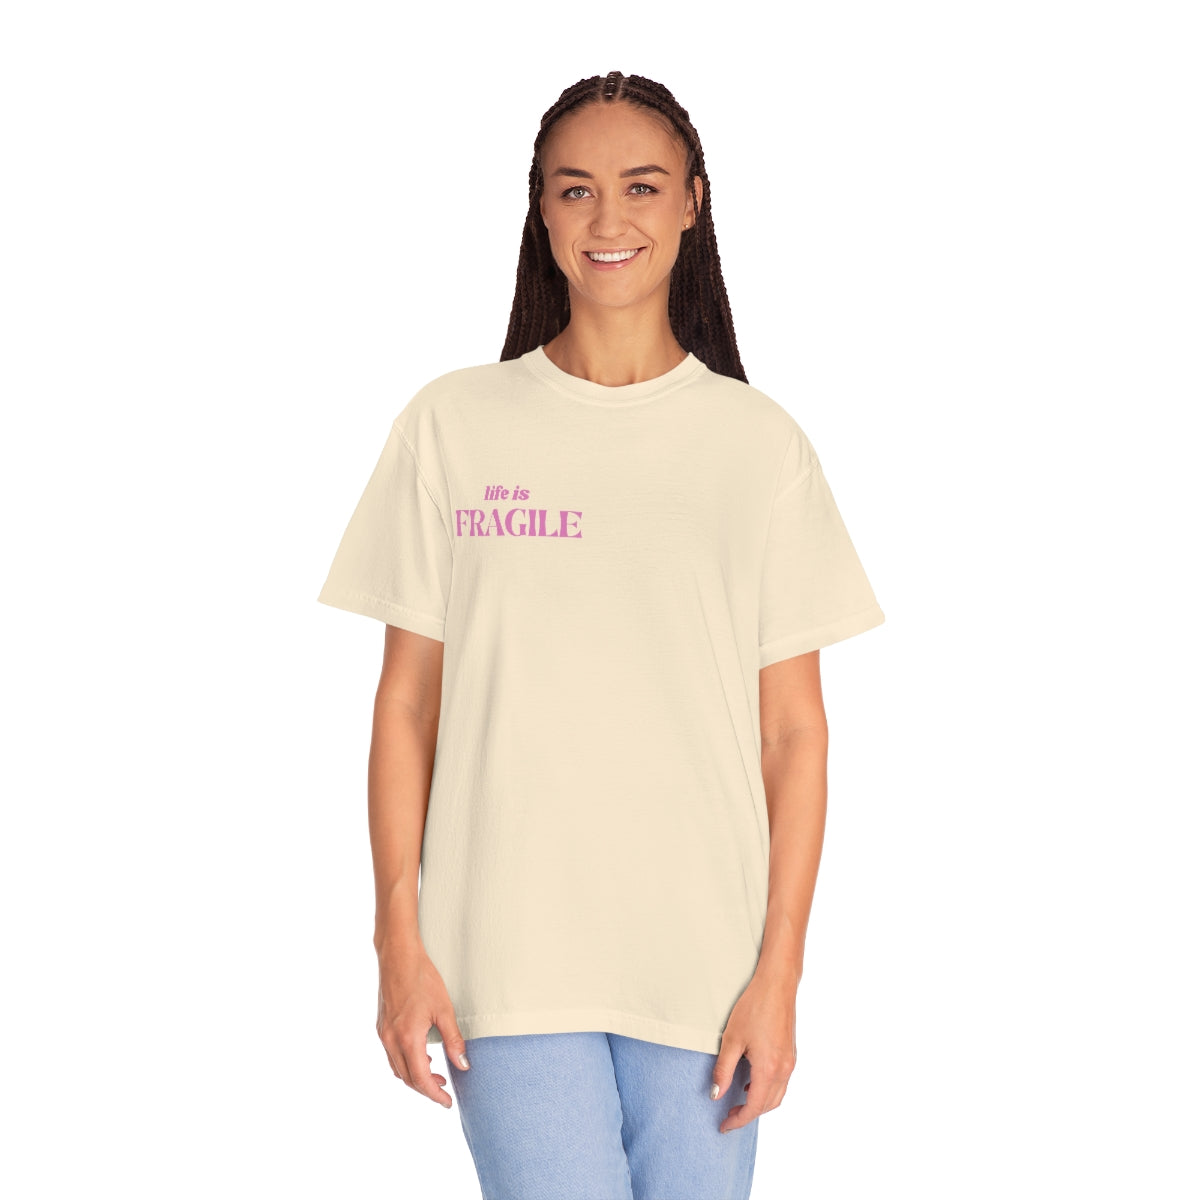 LIFE IS FRAGILE T SHIRT